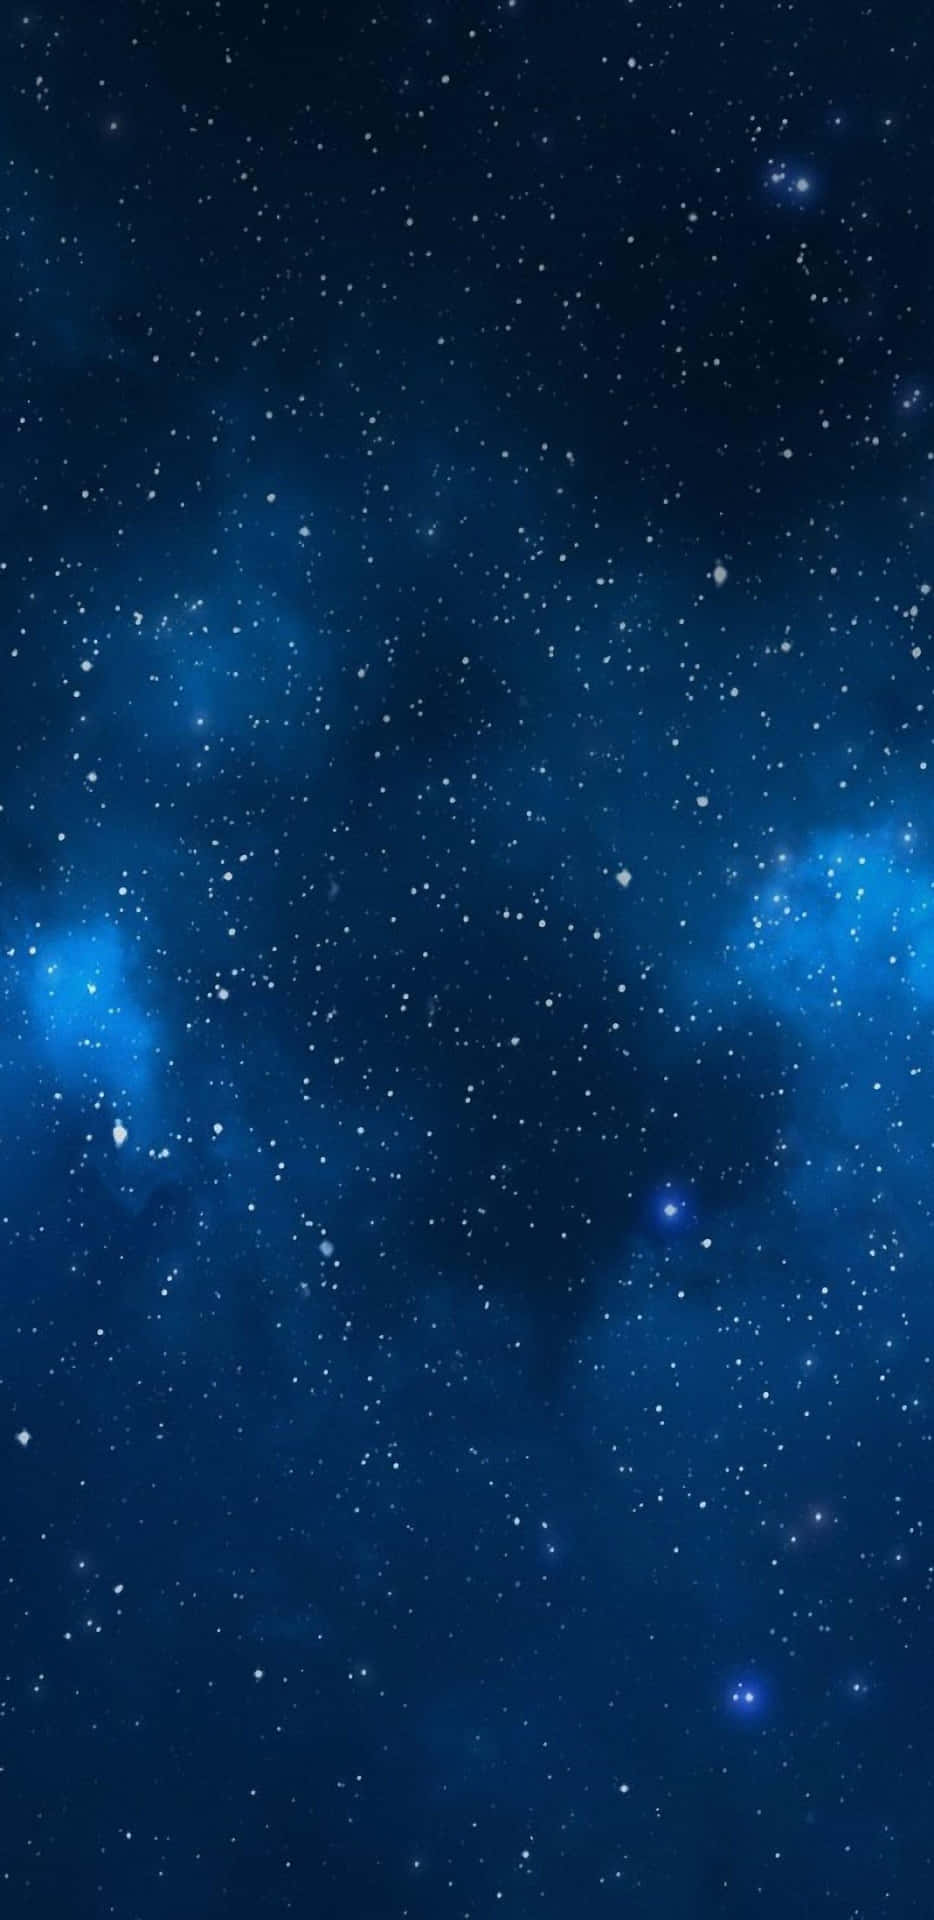 Shining bright in the night sky, experience the beauty of Blue Stars. Wallpaper